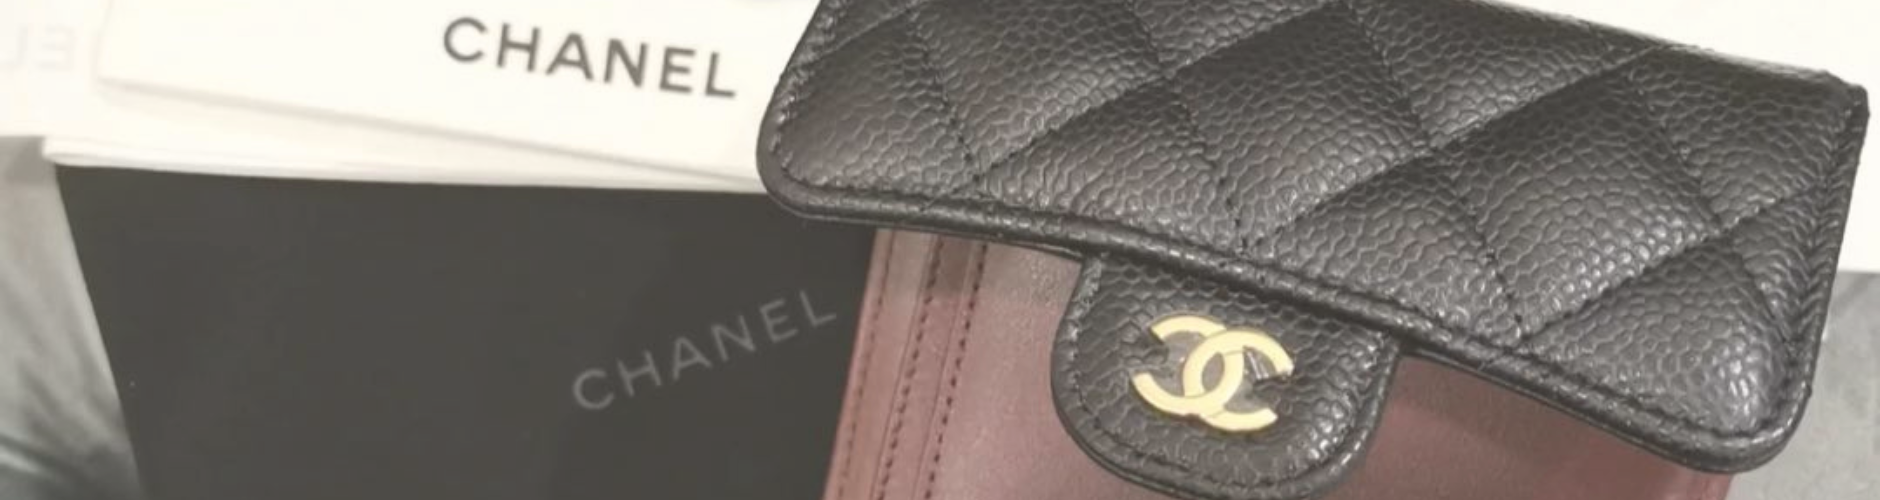 New Chanel Wallet